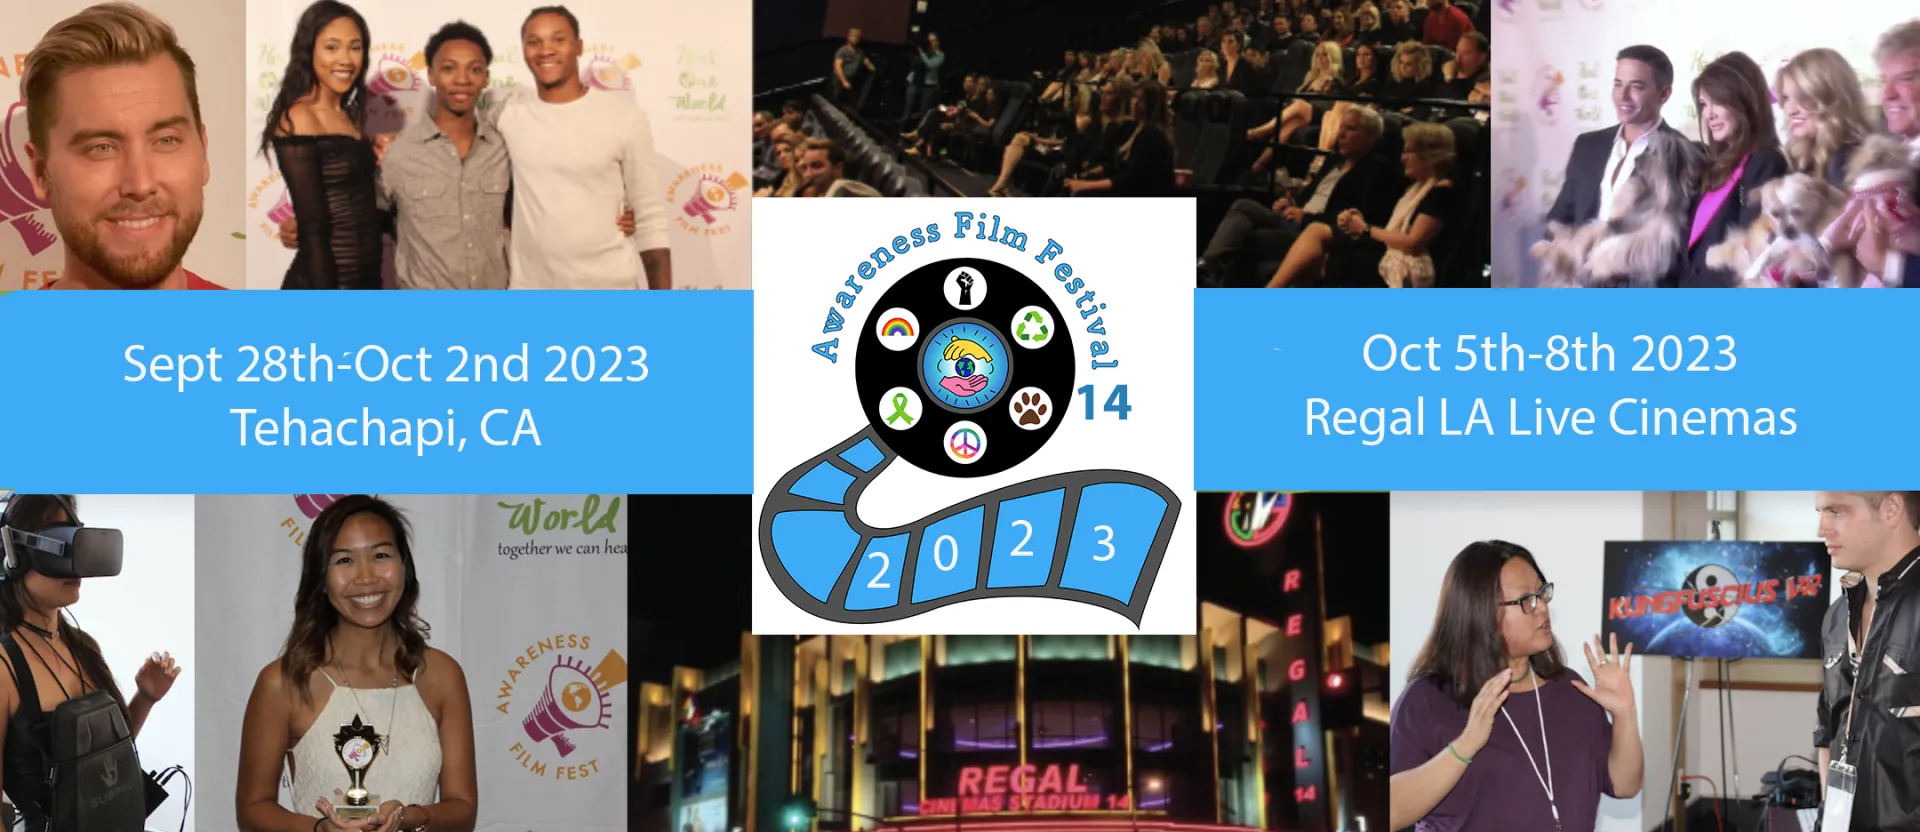 Awareness Film Festival at LA Live Regal Cinema by Heal One World